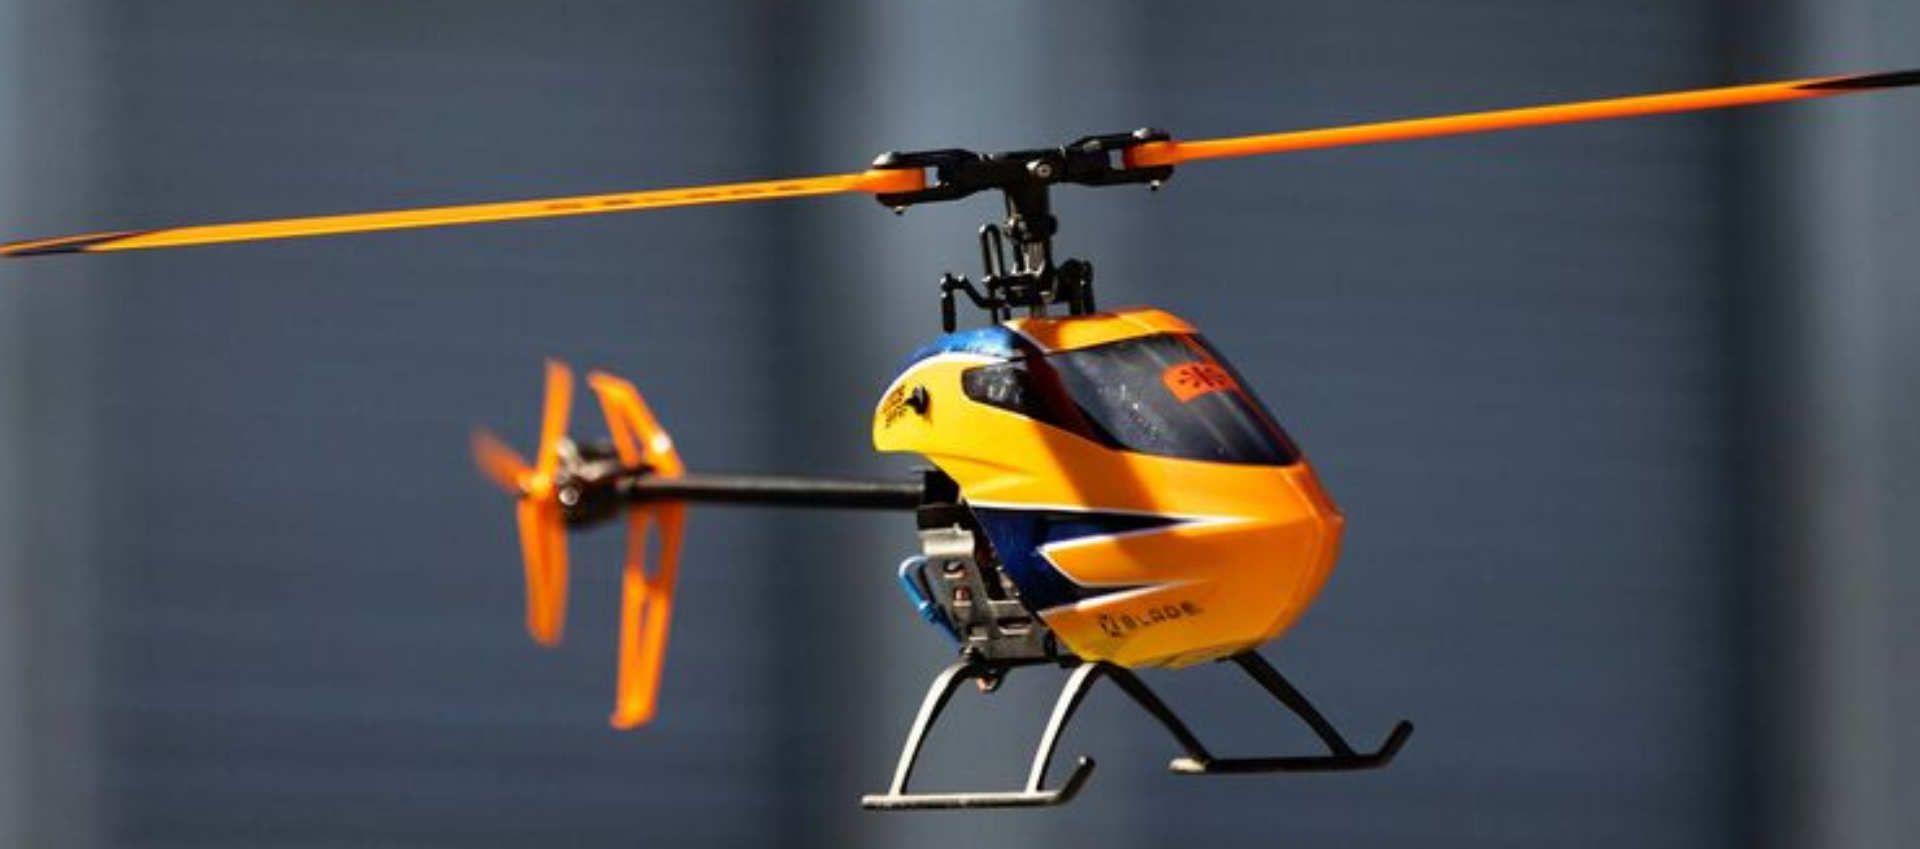 Remote Flying Helicopter: Types and Benefits of Remote Flying Helicopters